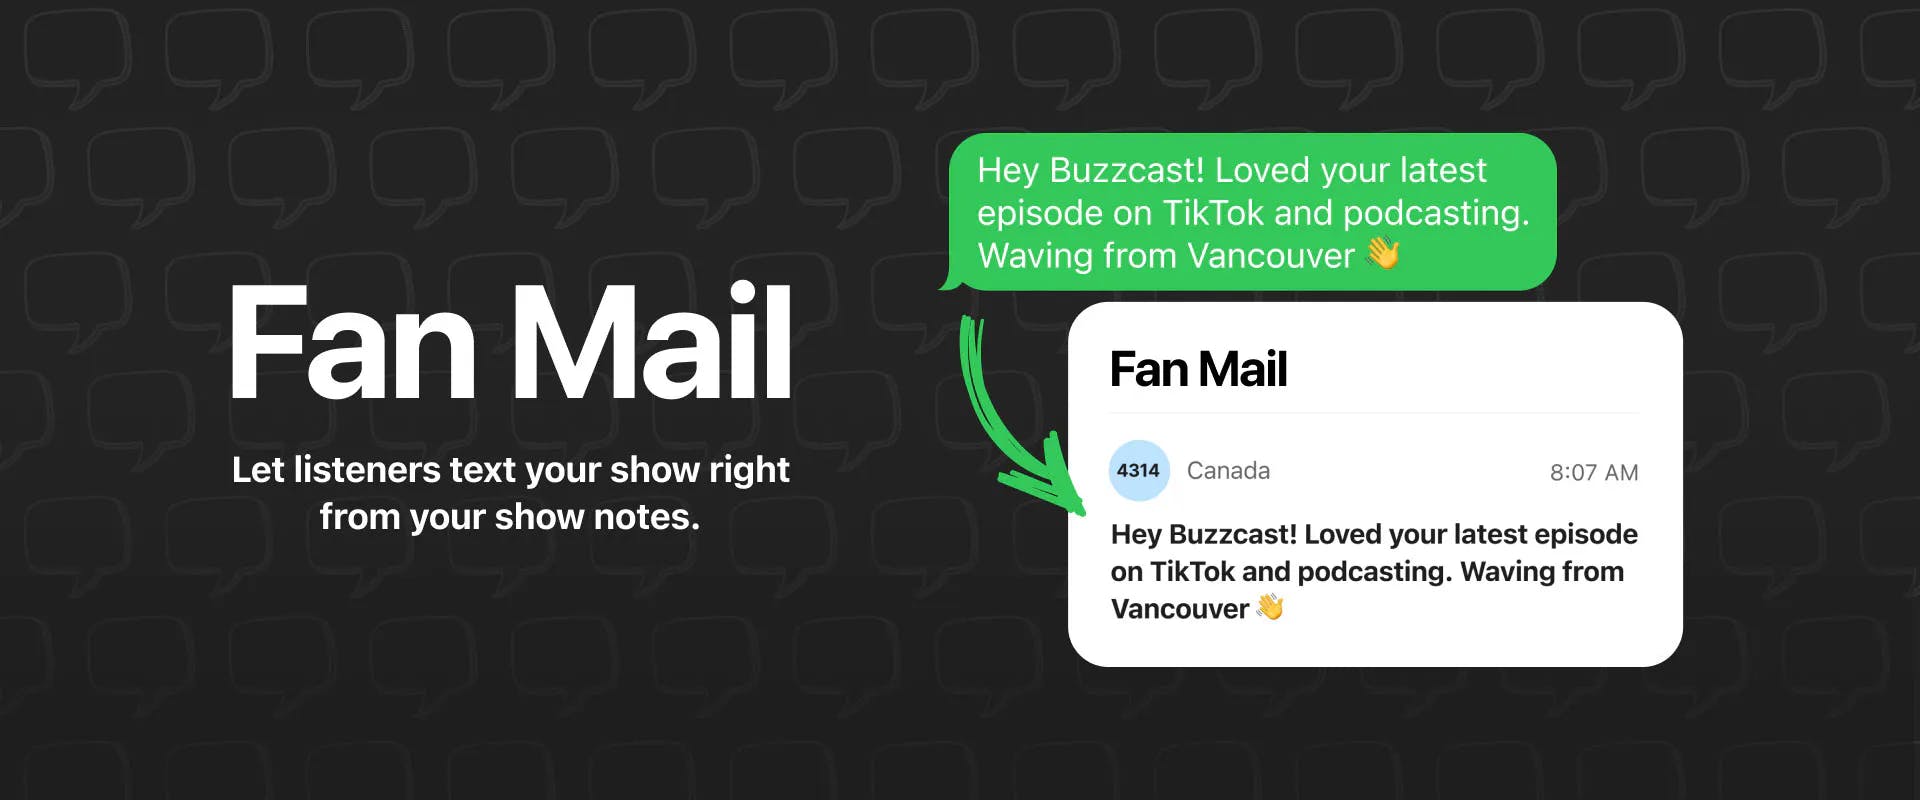 Fan Mail lets listeners text your show right from your show notes